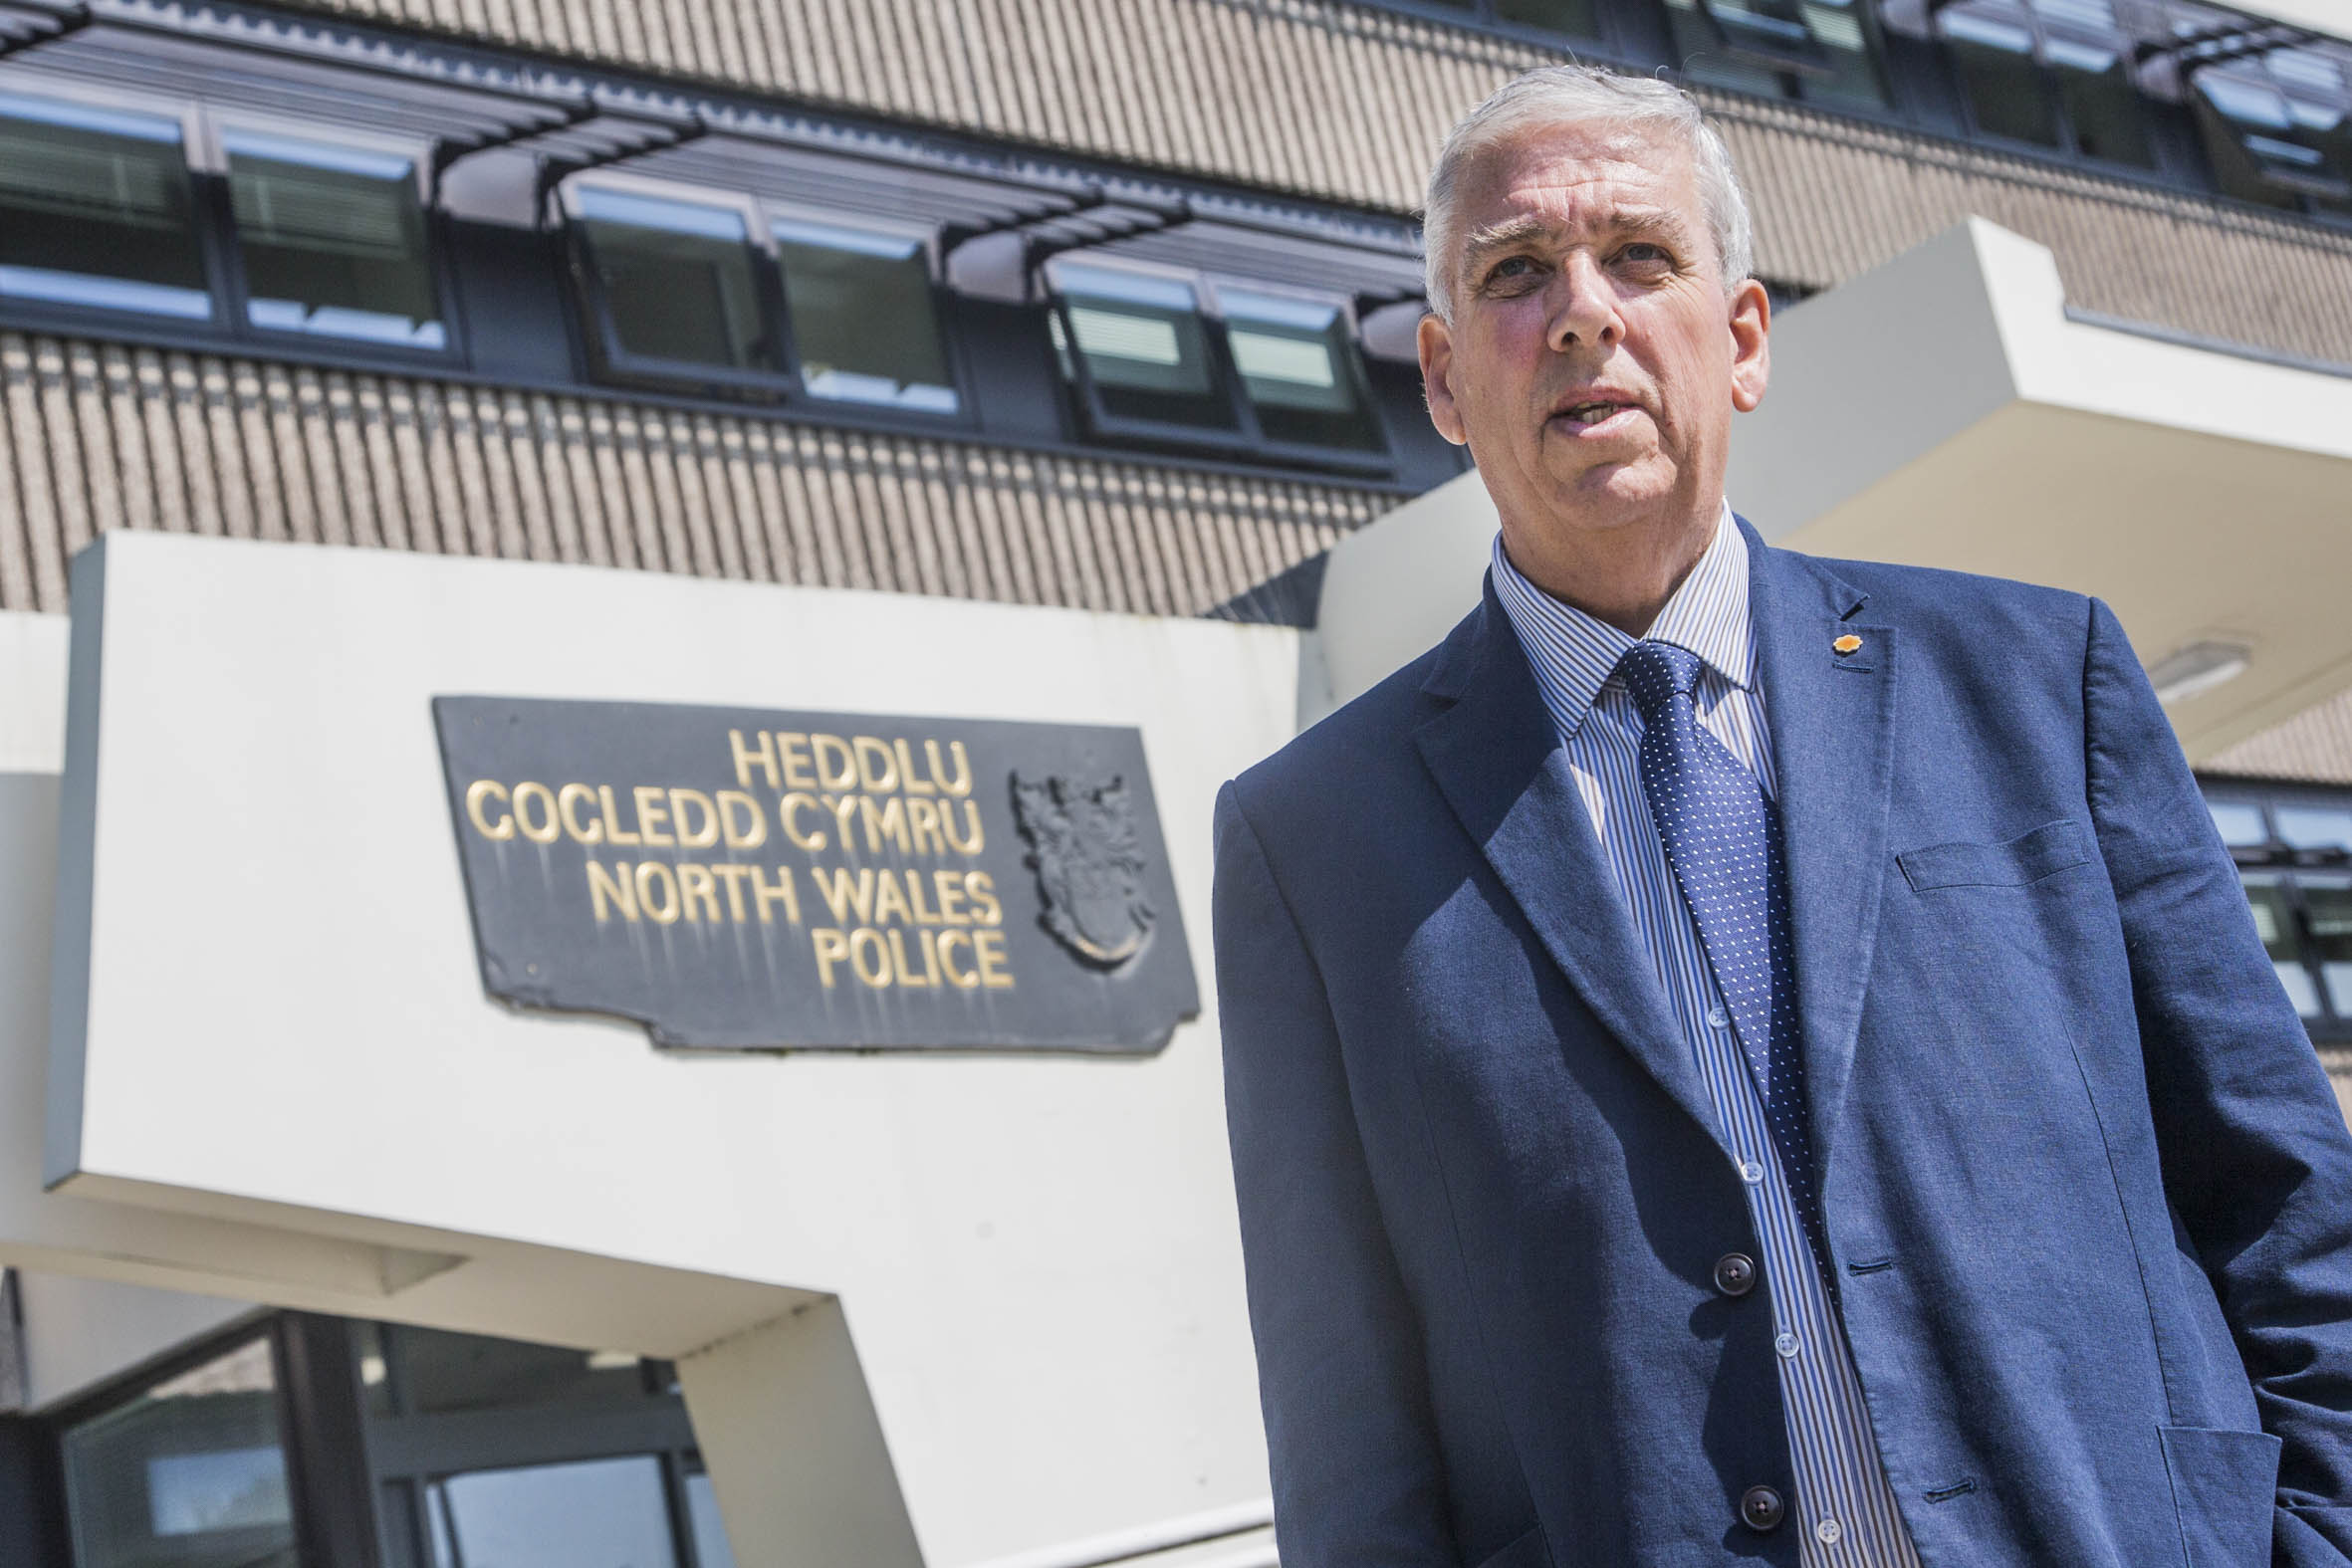 Police boss aims to break vicious cycle of crime passed from father to son